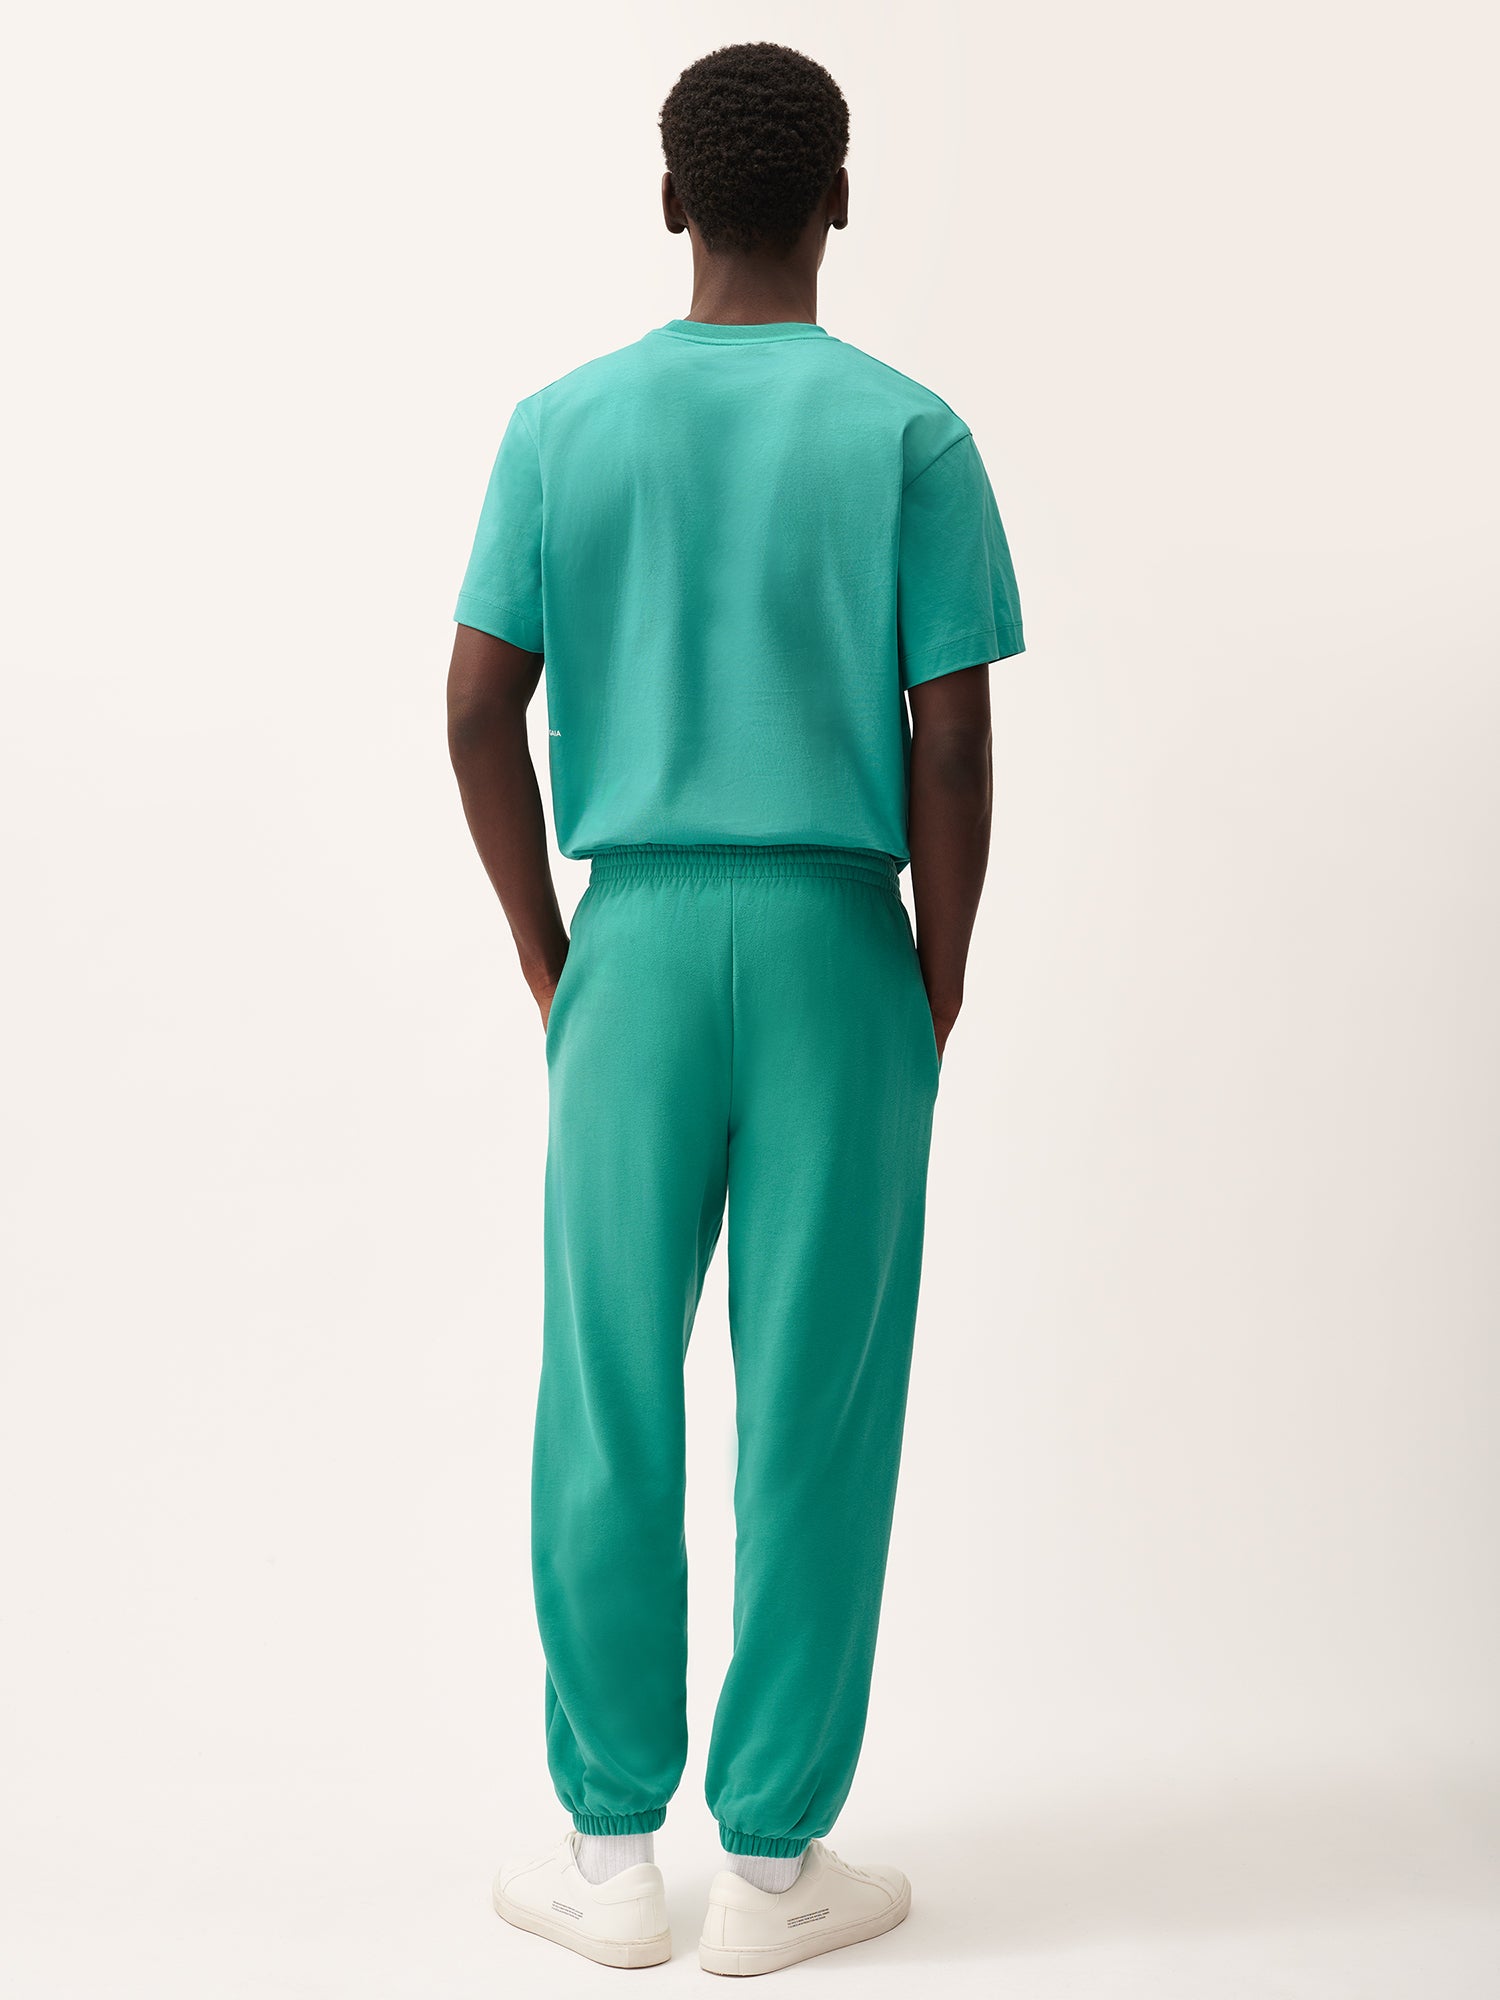 365_TrackPants_Mangrove_Turquoise_Male-3